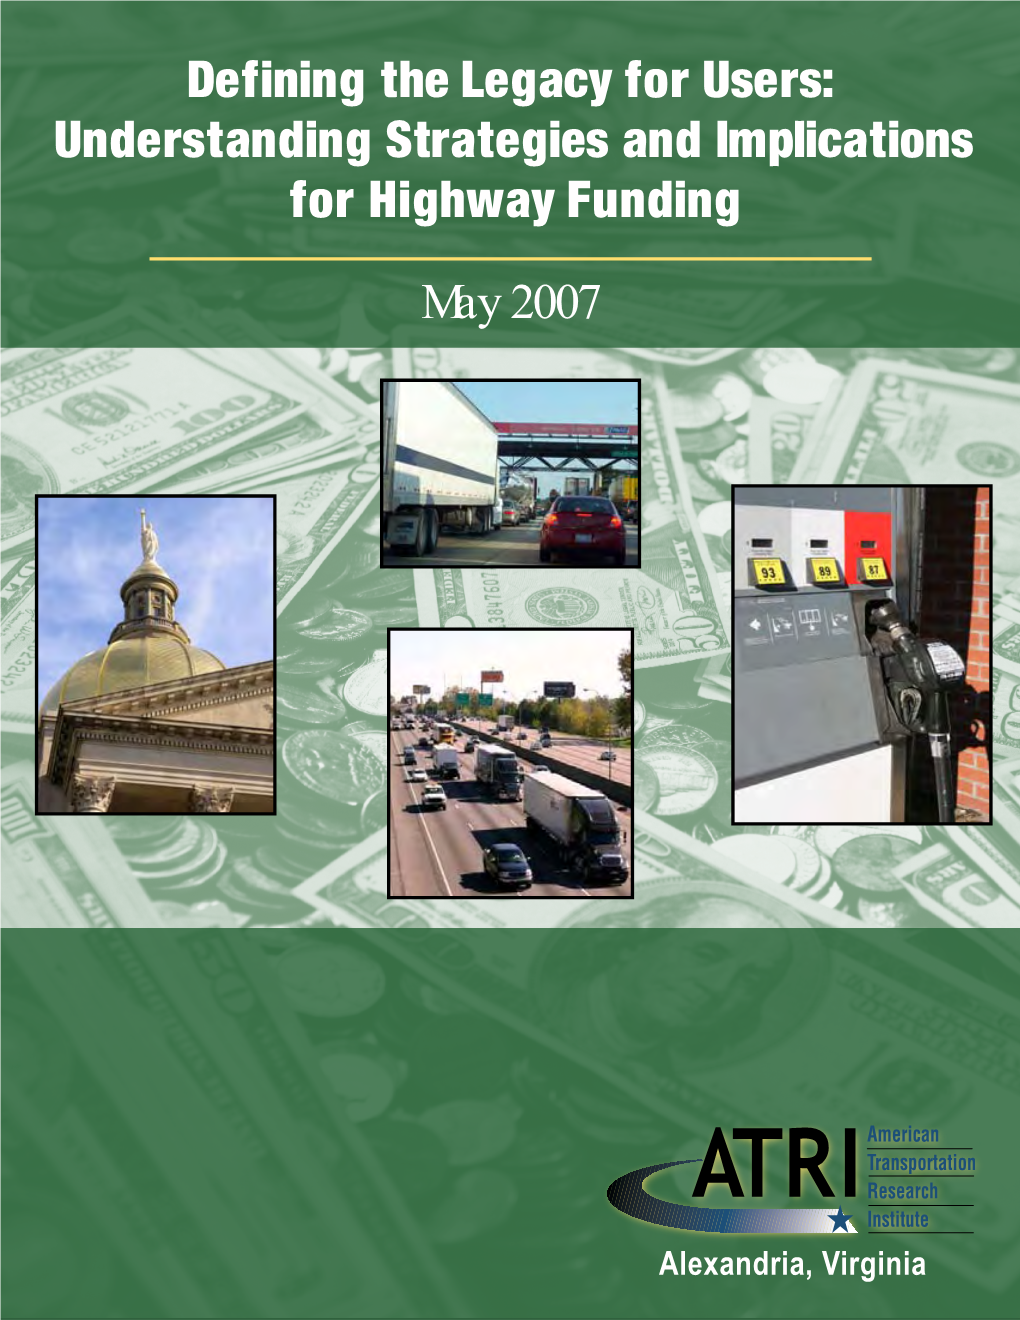 Strategies and Implication for Highway Funding